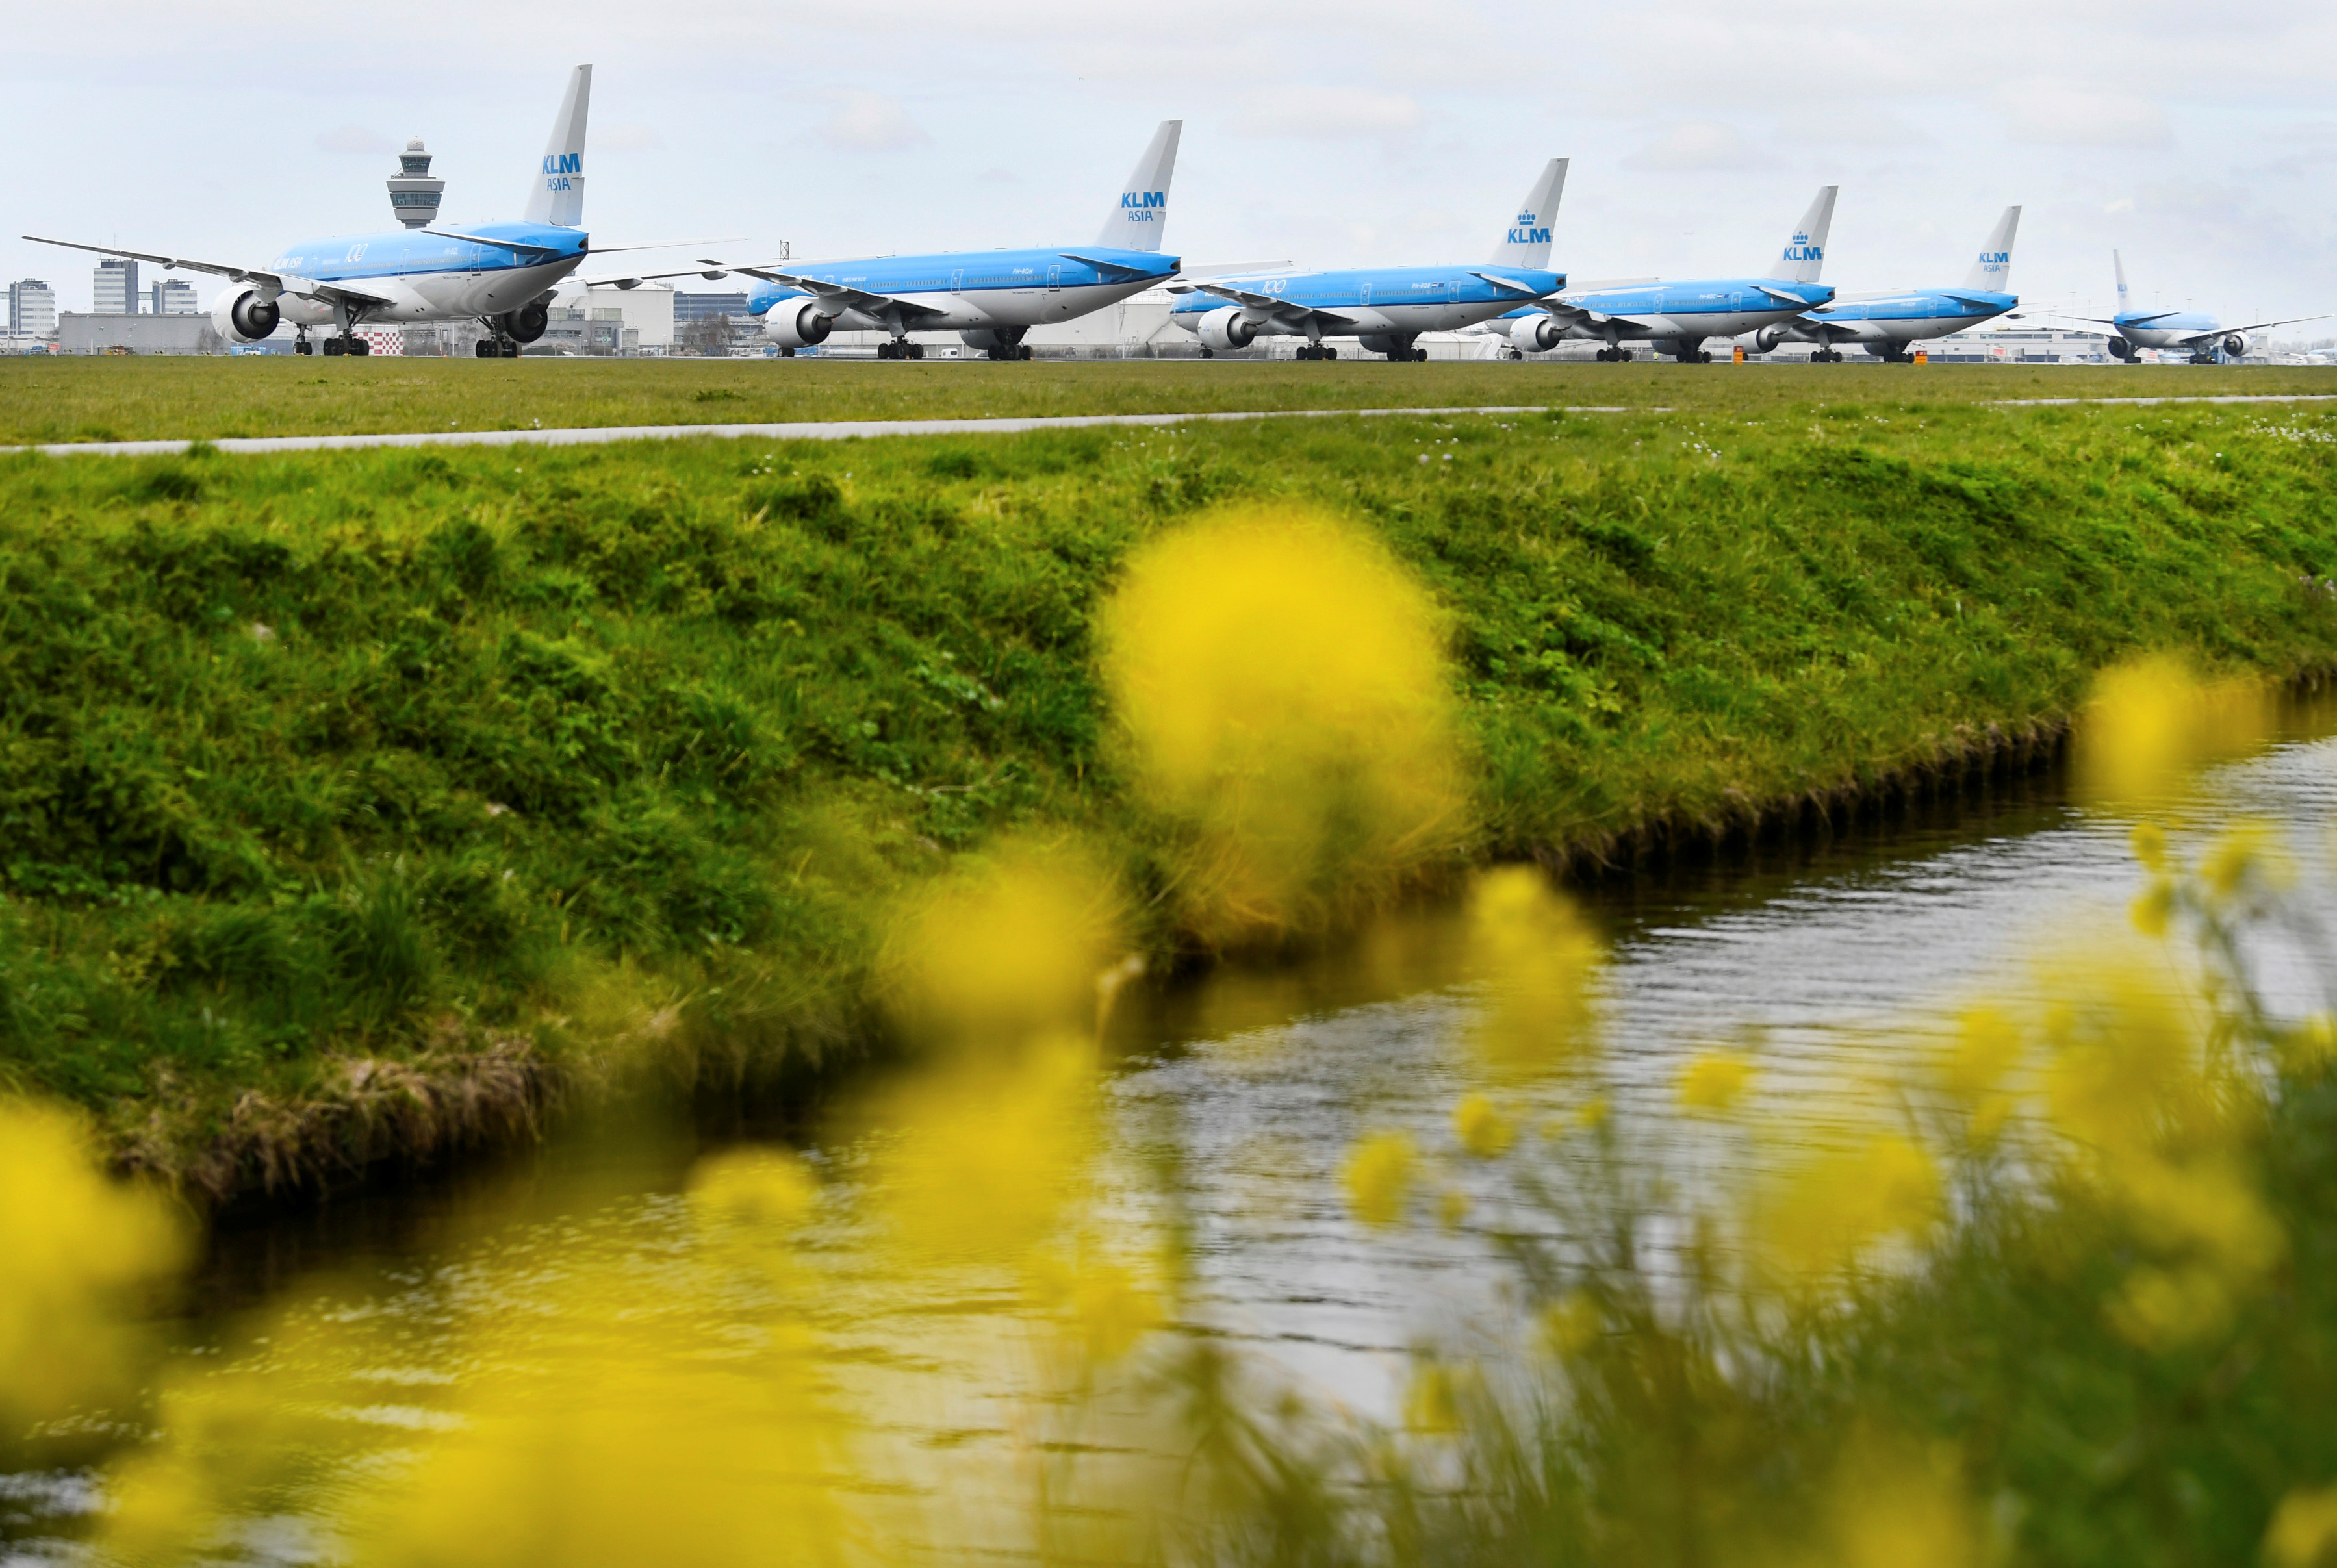 KLM airline aeroplanes parked at Schiphol Airport, Amsterdam, Netherlands